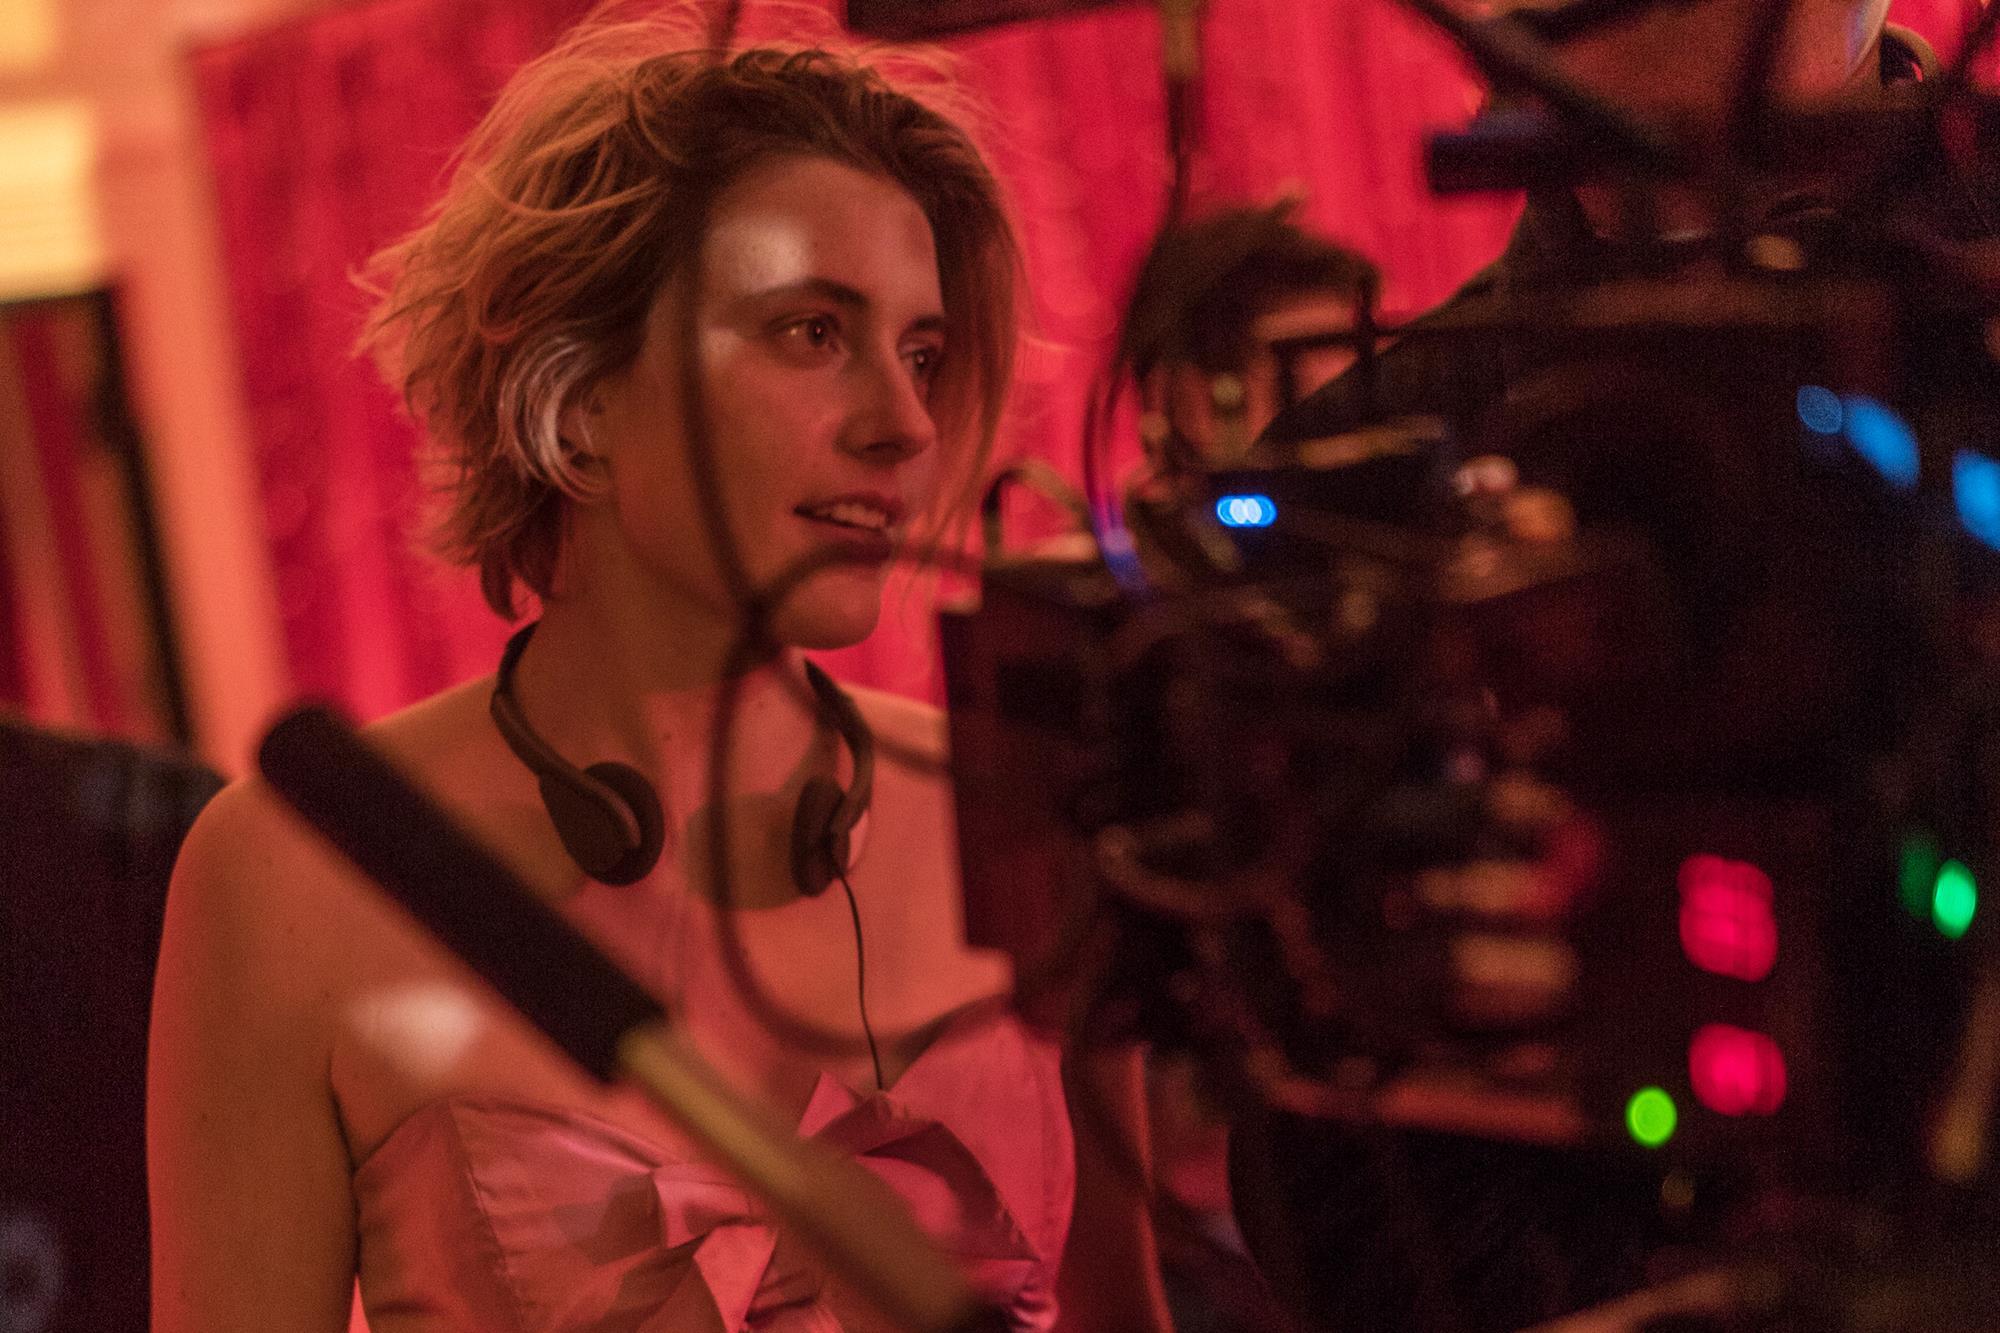 Happy birthday to the incredible Greta Gerwig, who continues to amaze us both on and off screen  